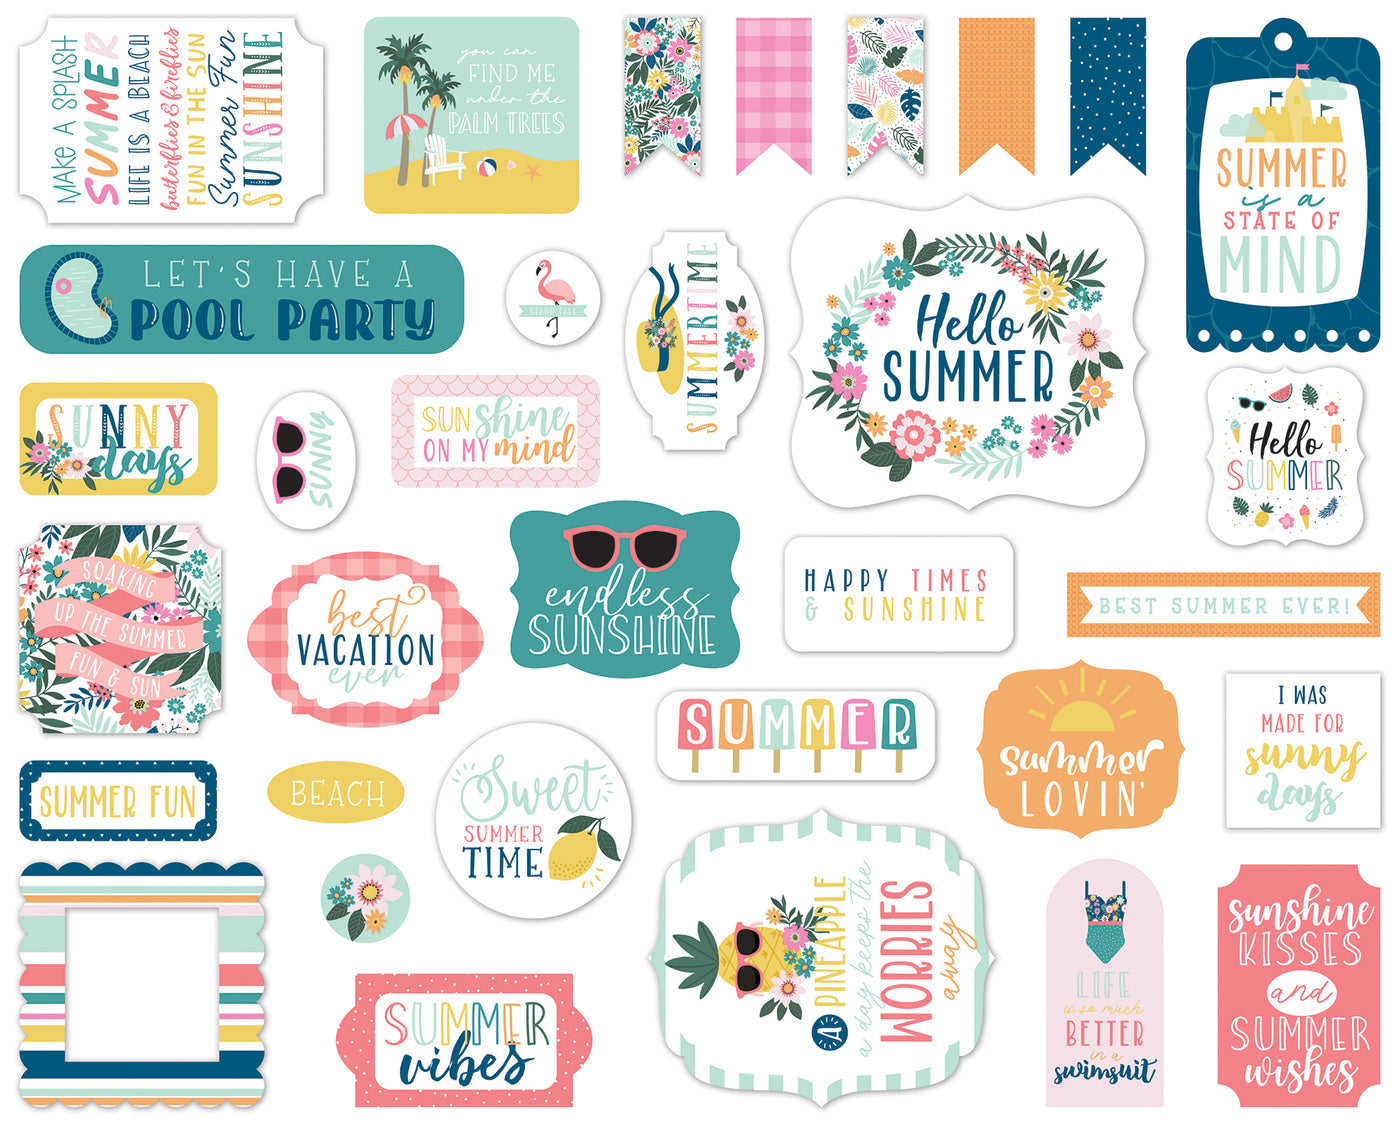 Pool Party Ephemera Die Cut Cardstock Pack.  Pack includes 33 different die-cut shapes ready to embellish any project.